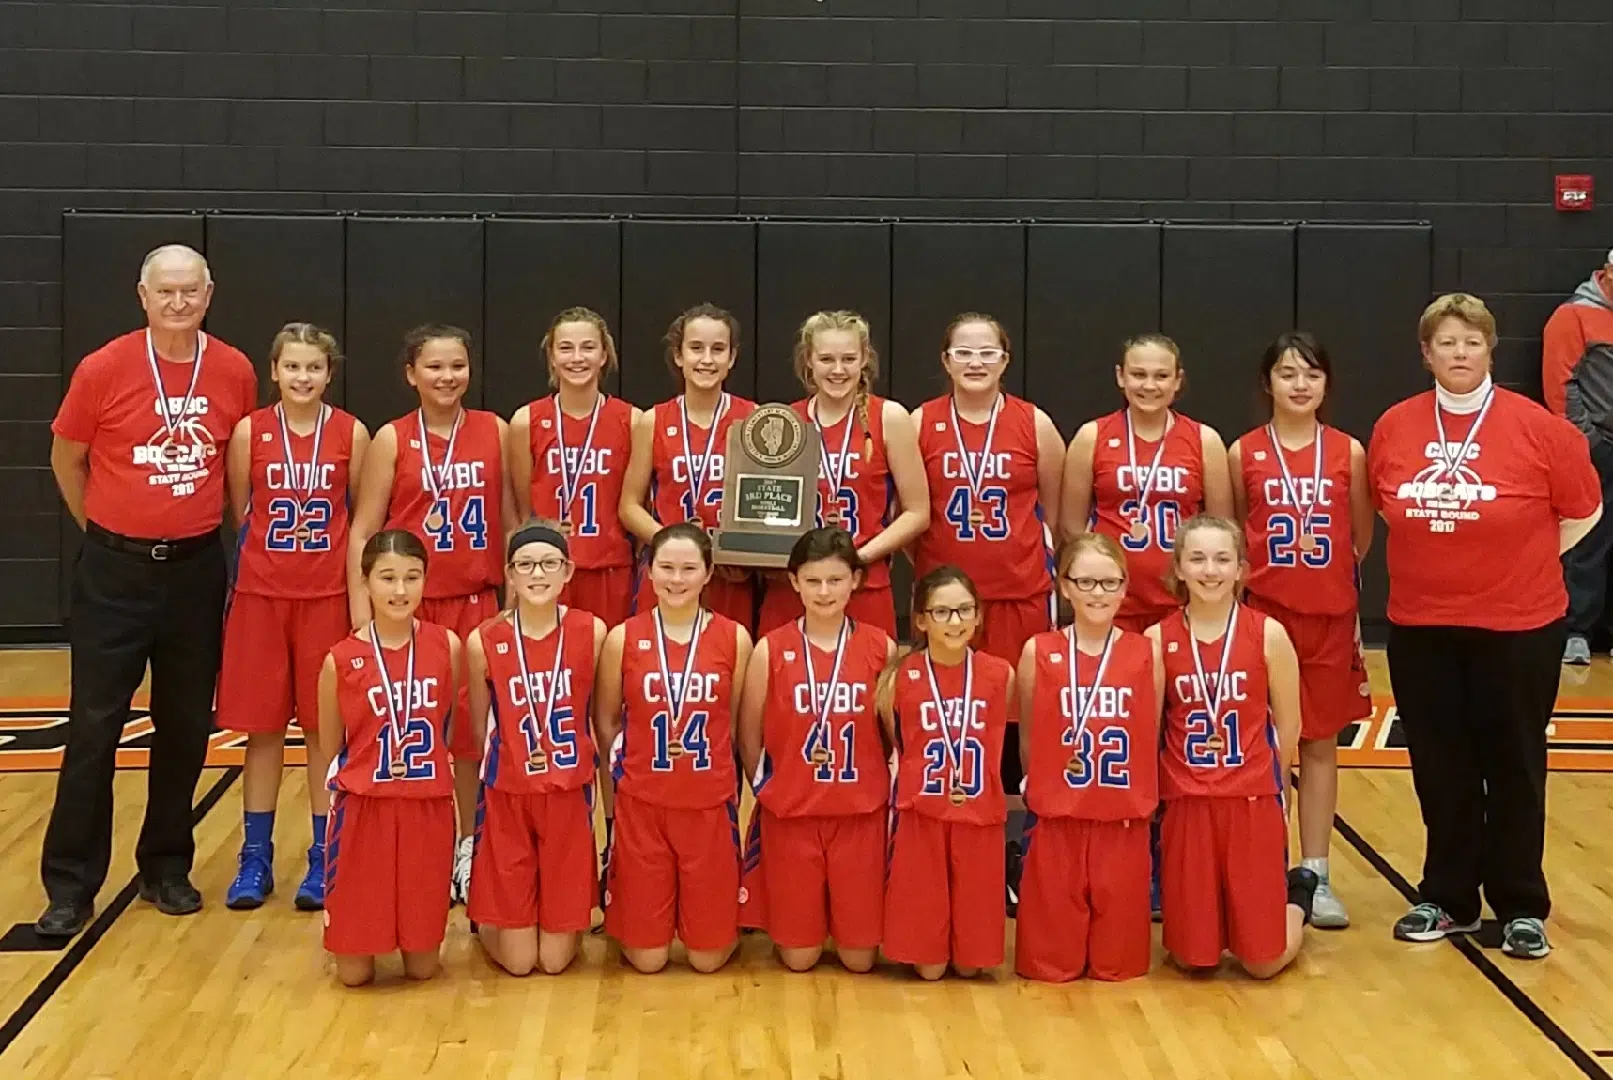 CHBC 7th grade girls basketball team takes 3rd place in State Tournament 